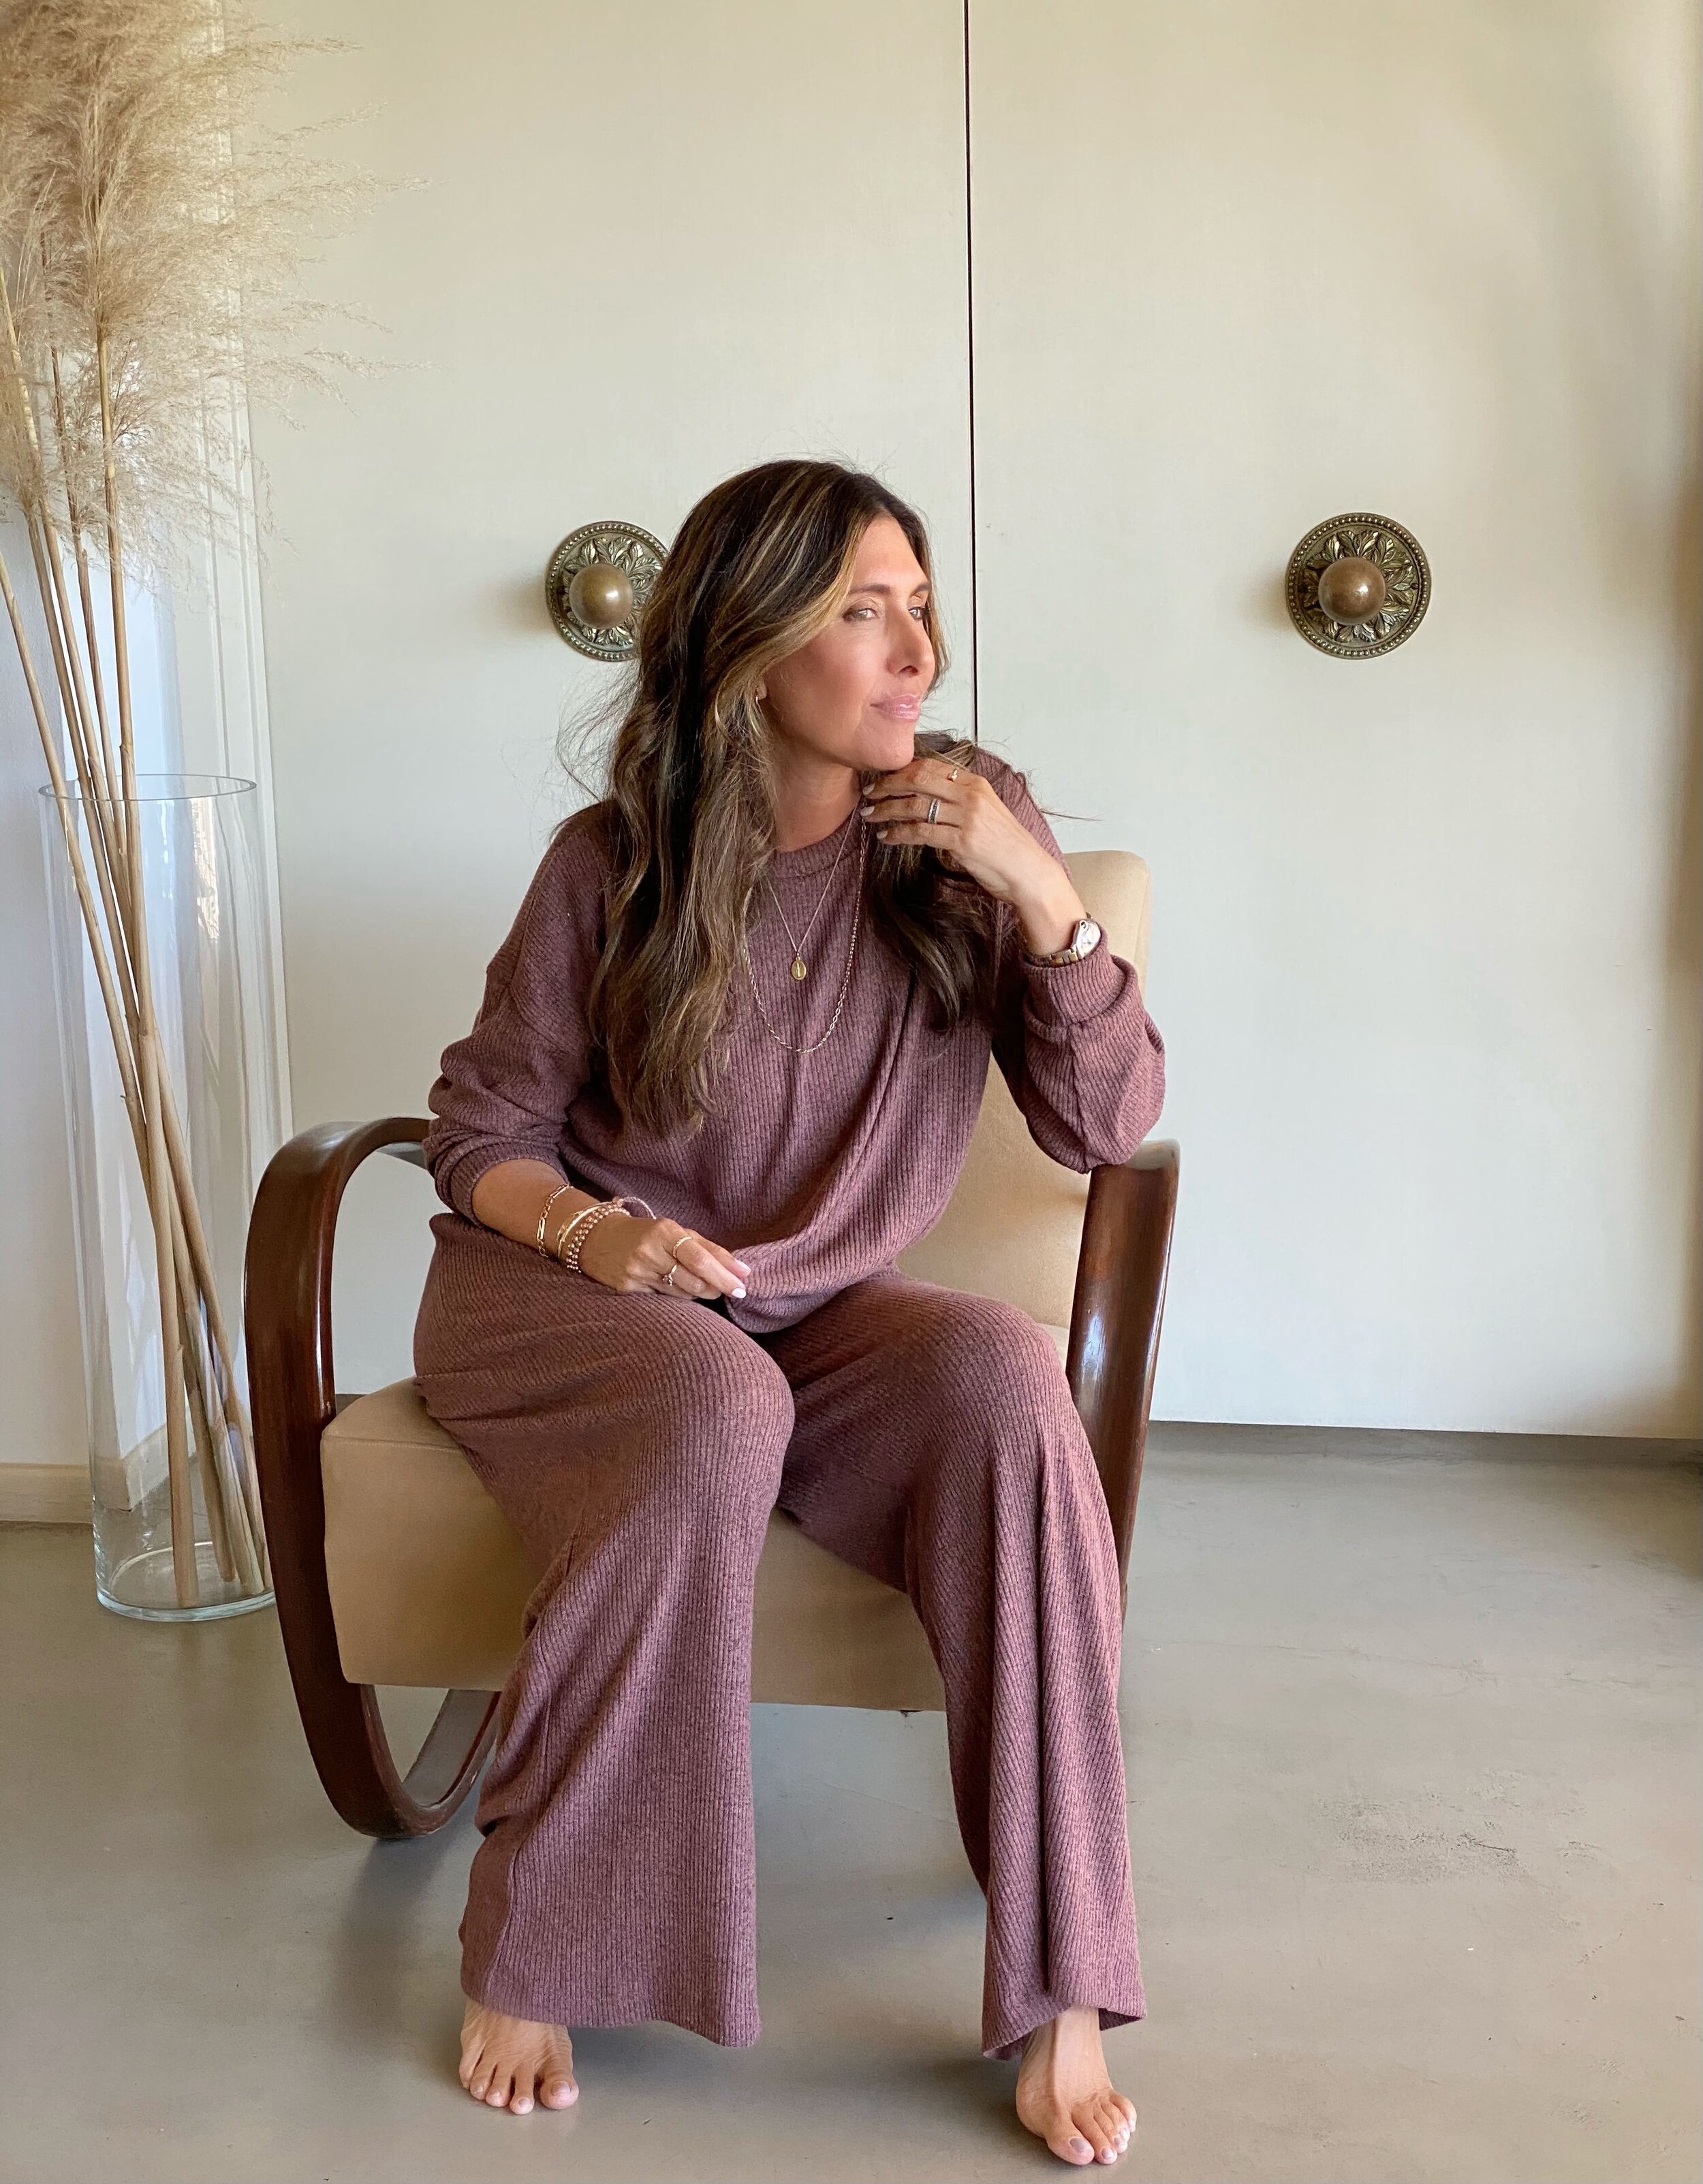 Where to Shop for Comfy Chic Loungewear - Sydne Style  Cute lounge  outfits, Lounge wear stylish, Chic loungewear